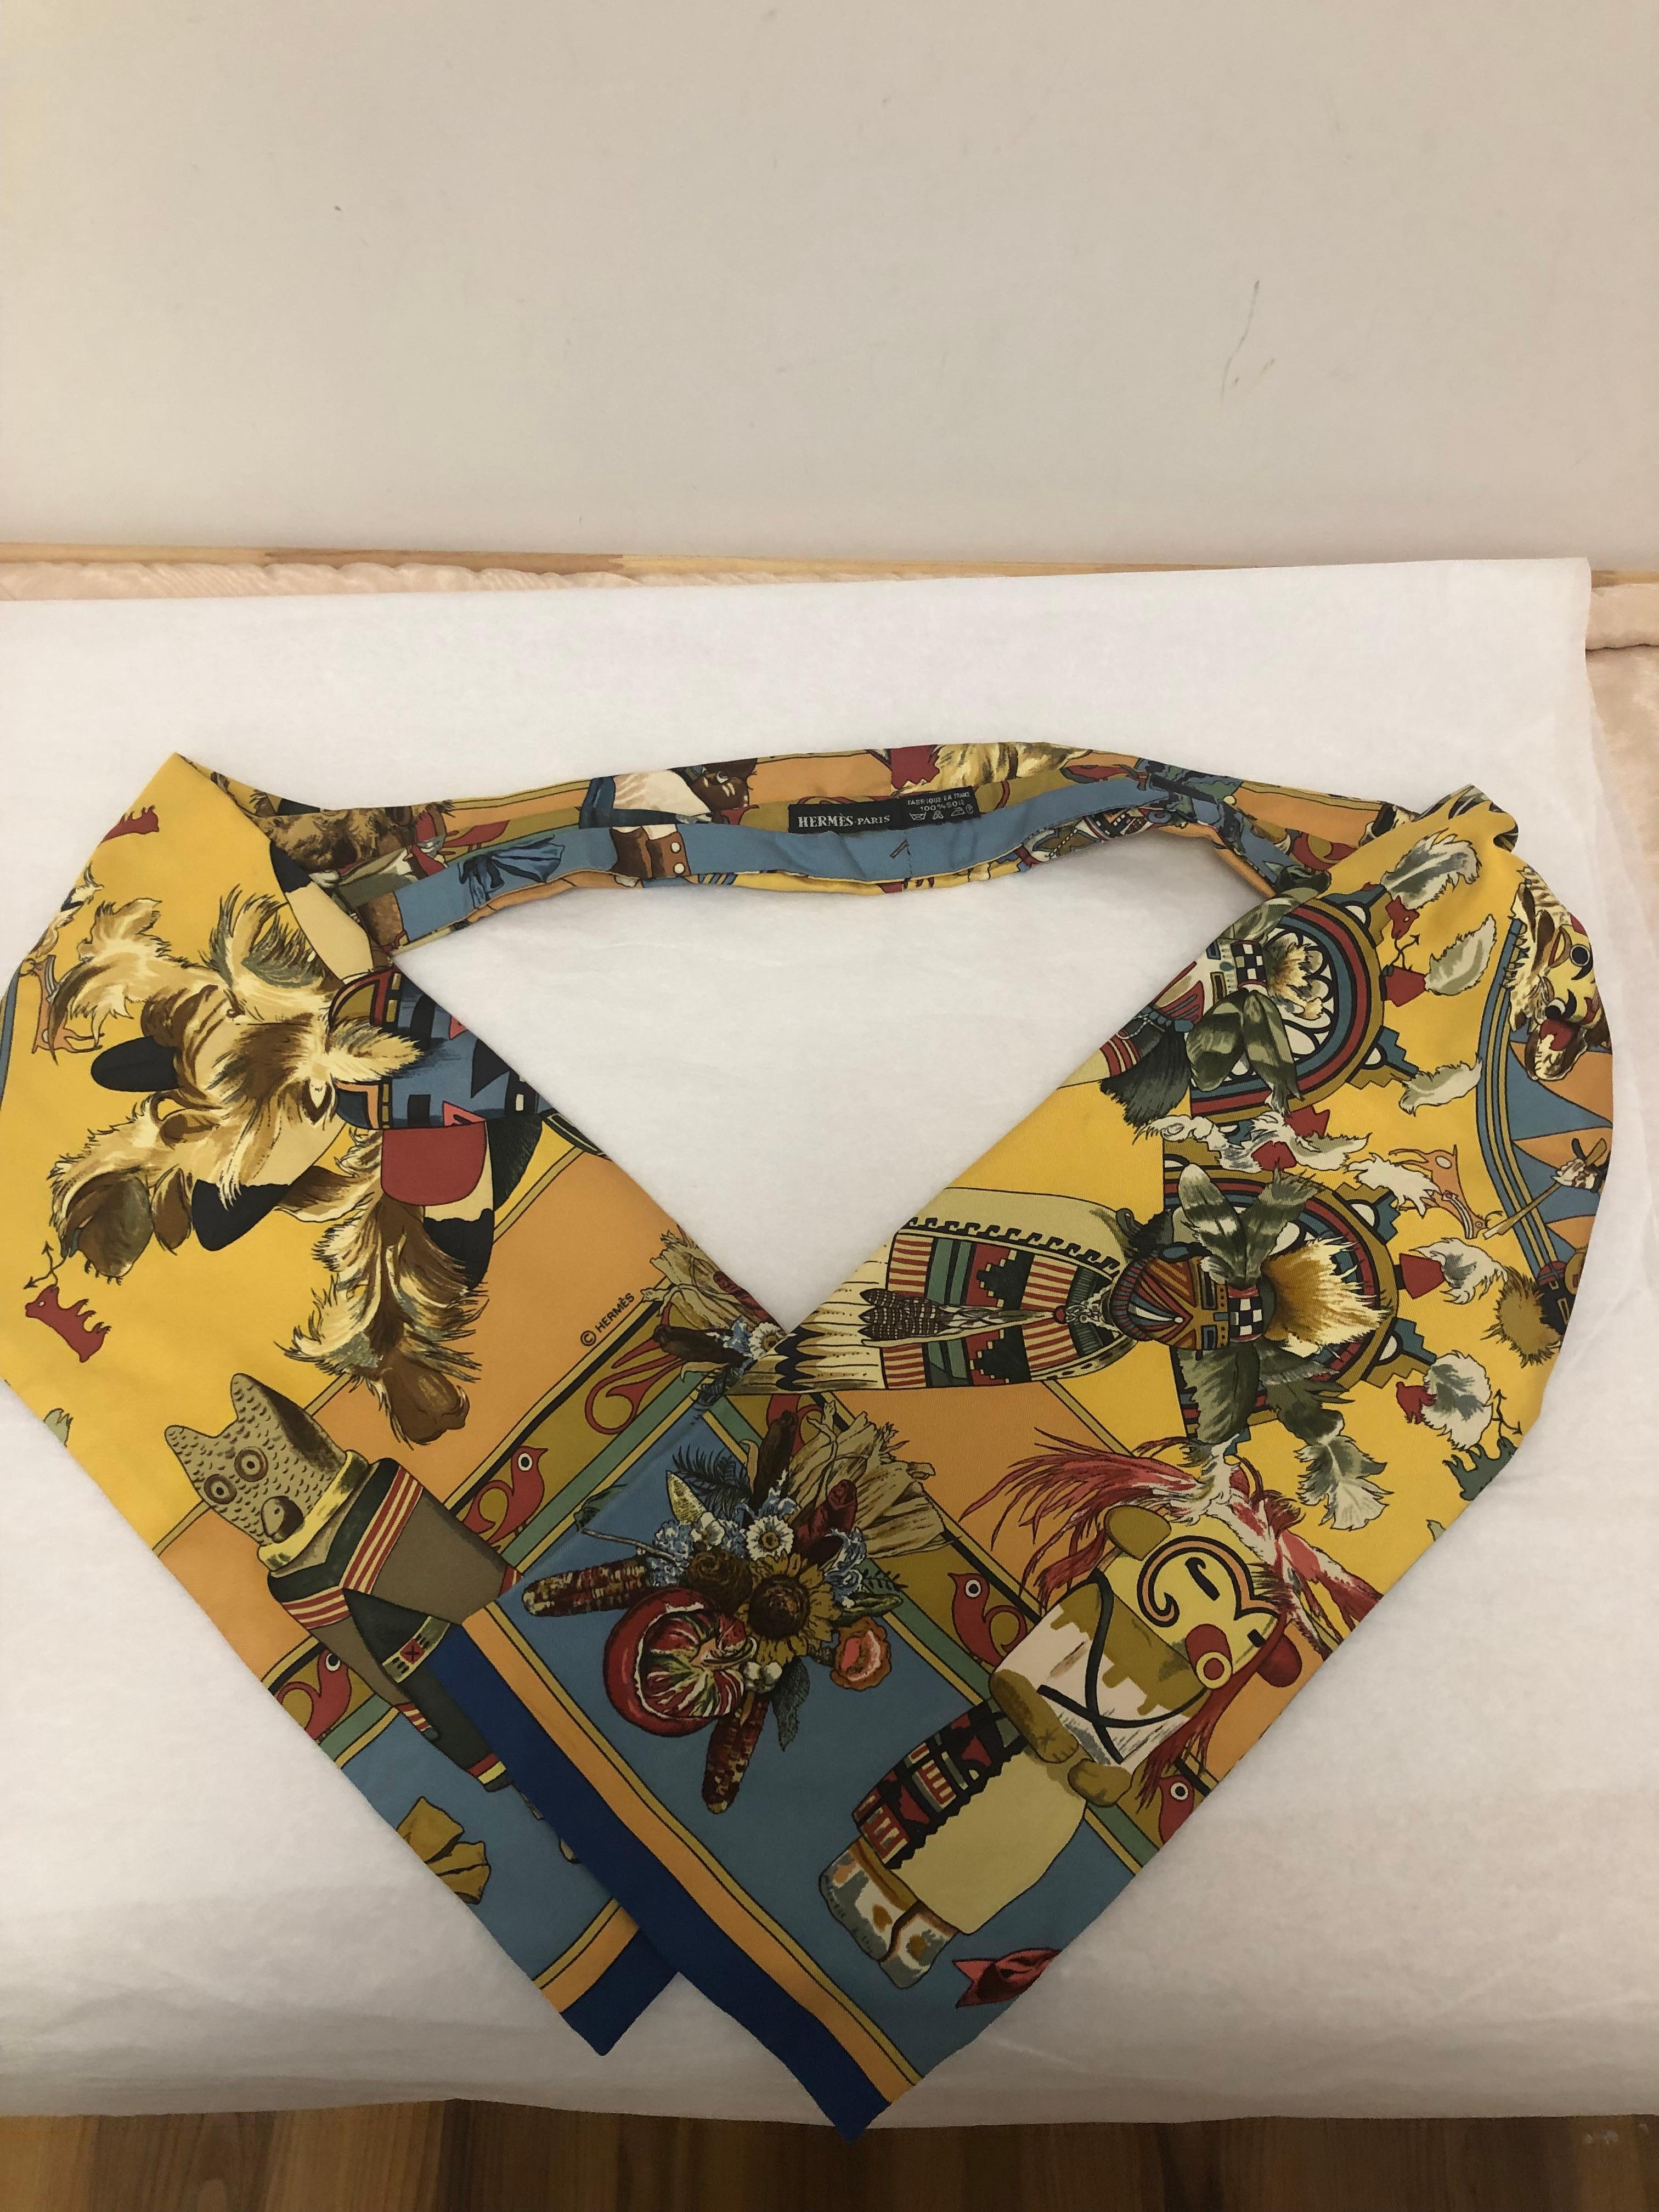 Designed by Kermit Oliver, this silk ascot/scarf represents images from the Navajo Chimayo People legends.
Kermit Oliver born in Texas designed many scarves for Hermes, most being of Native American culture.
